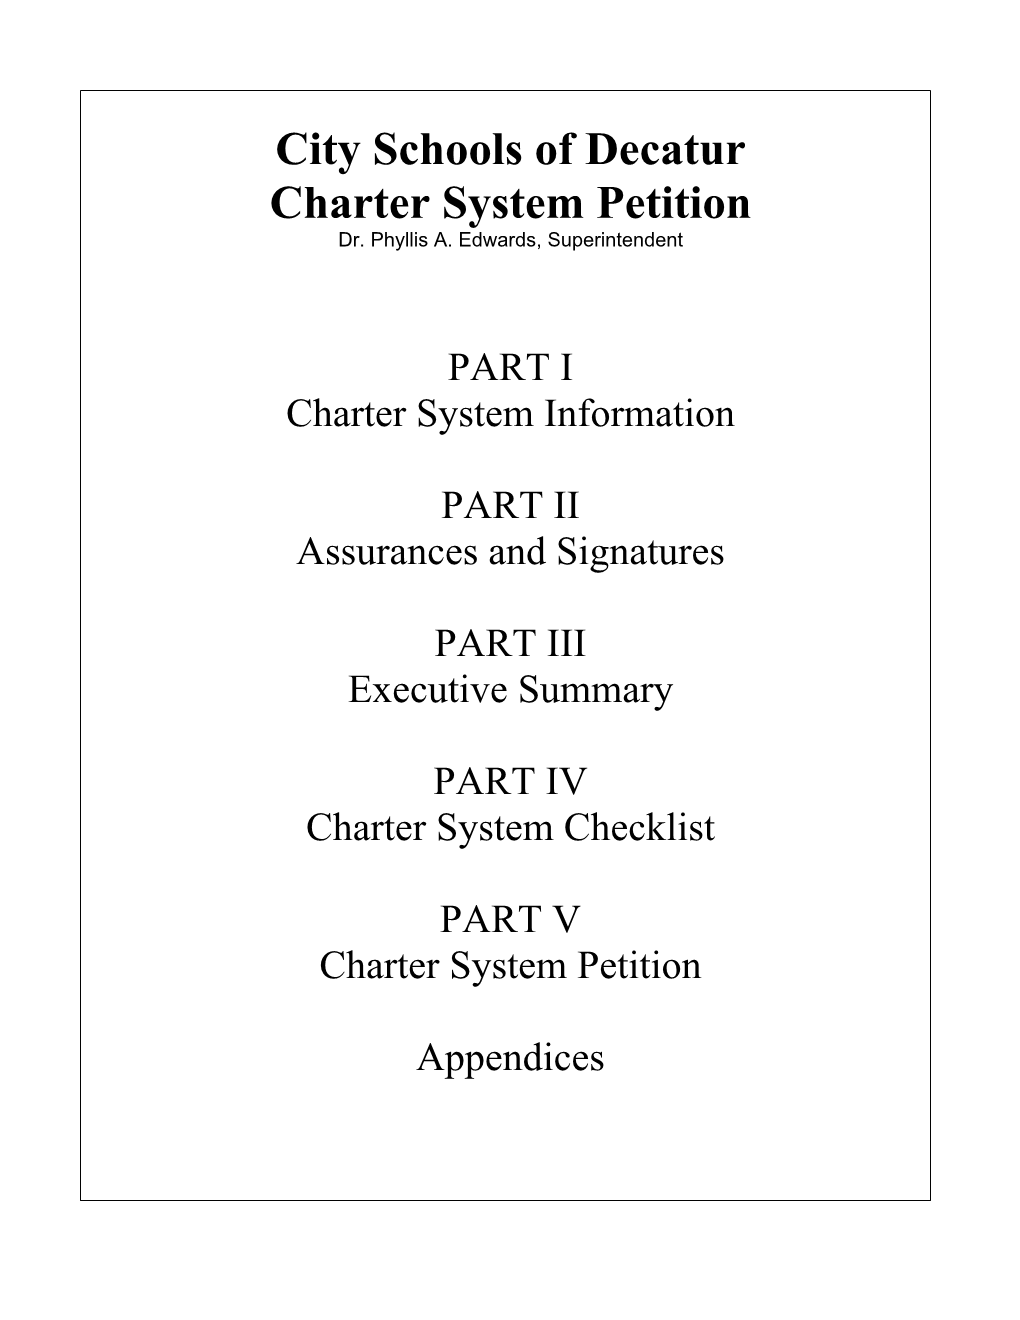 City Schools of Decatur Charter System Petition Dr